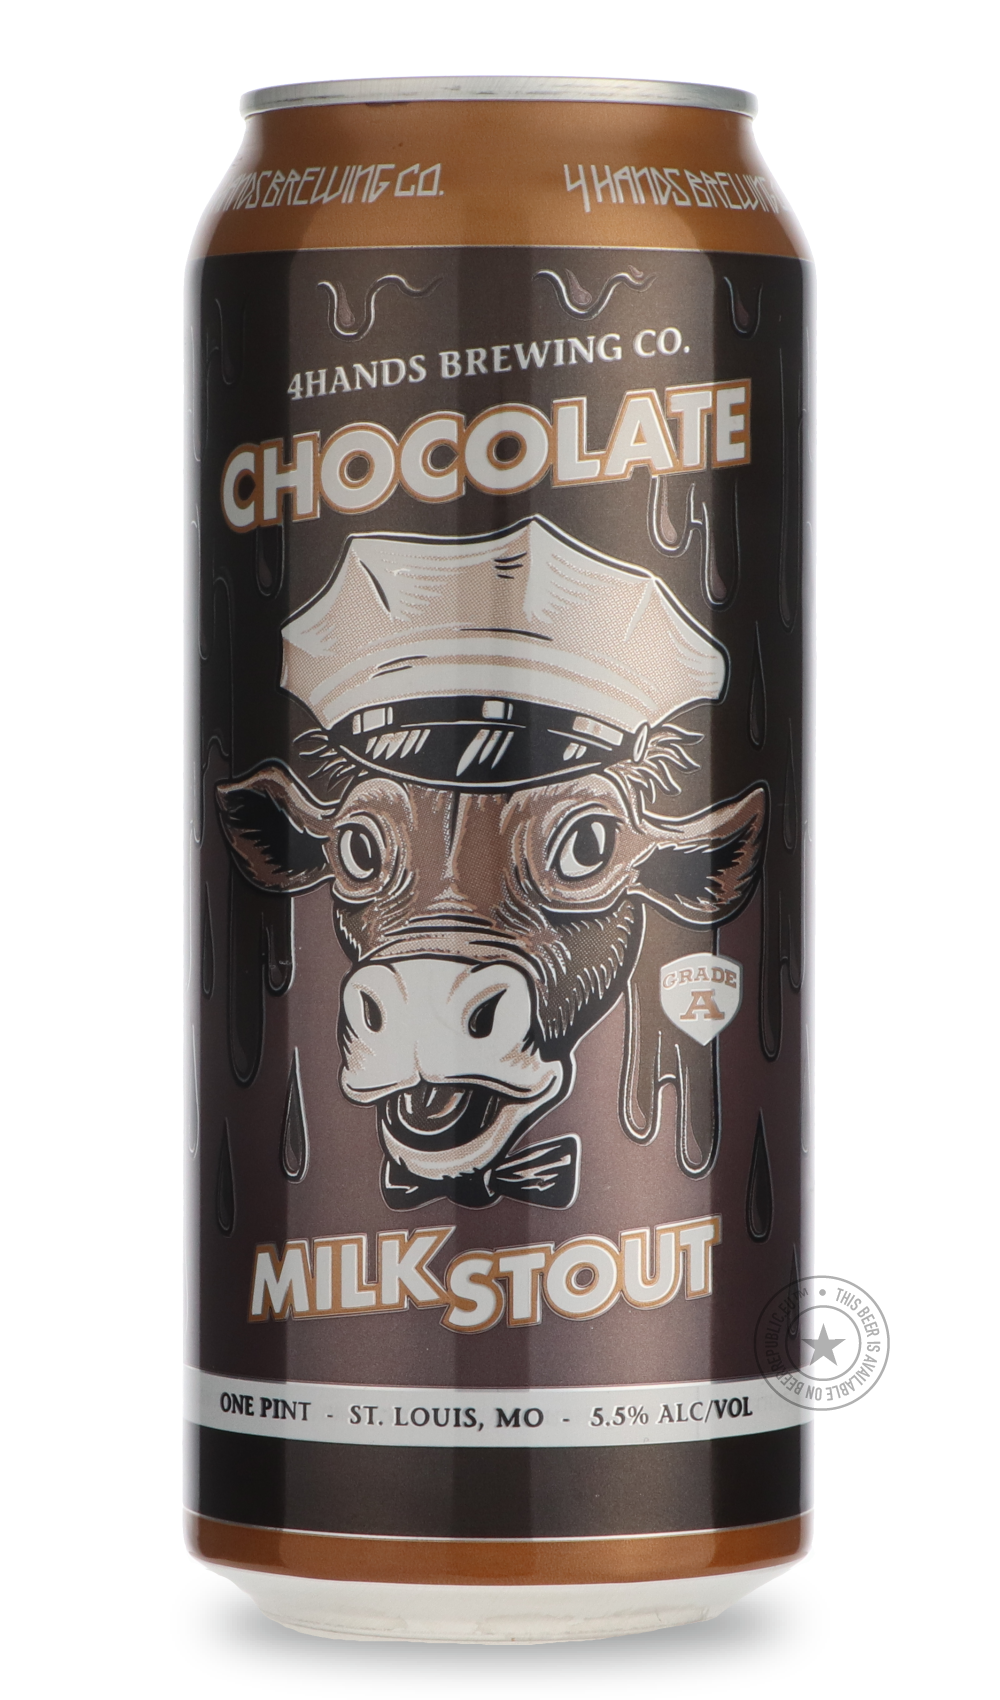 -4 Hands- Chocolate Milk Stout-Stout & Porter- Only @ Beer Republic - The best online beer store for American & Canadian craft beer - Buy beer online from the USA and Canada - Bier online kopen - Amerikaans bier kopen - Craft beer store - Craft beer kopen - Amerikanisch bier kaufen - Bier online kaufen - Acheter biere online - IPA - Stout - Porter - New England IPA - Hazy IPA - Imperial Stout - Barrel Aged - Barrel Aged Imperial Stout - Brown - Dark beer - Blond - Blonde - Pilsner - Lager - Wheat - Weizen -